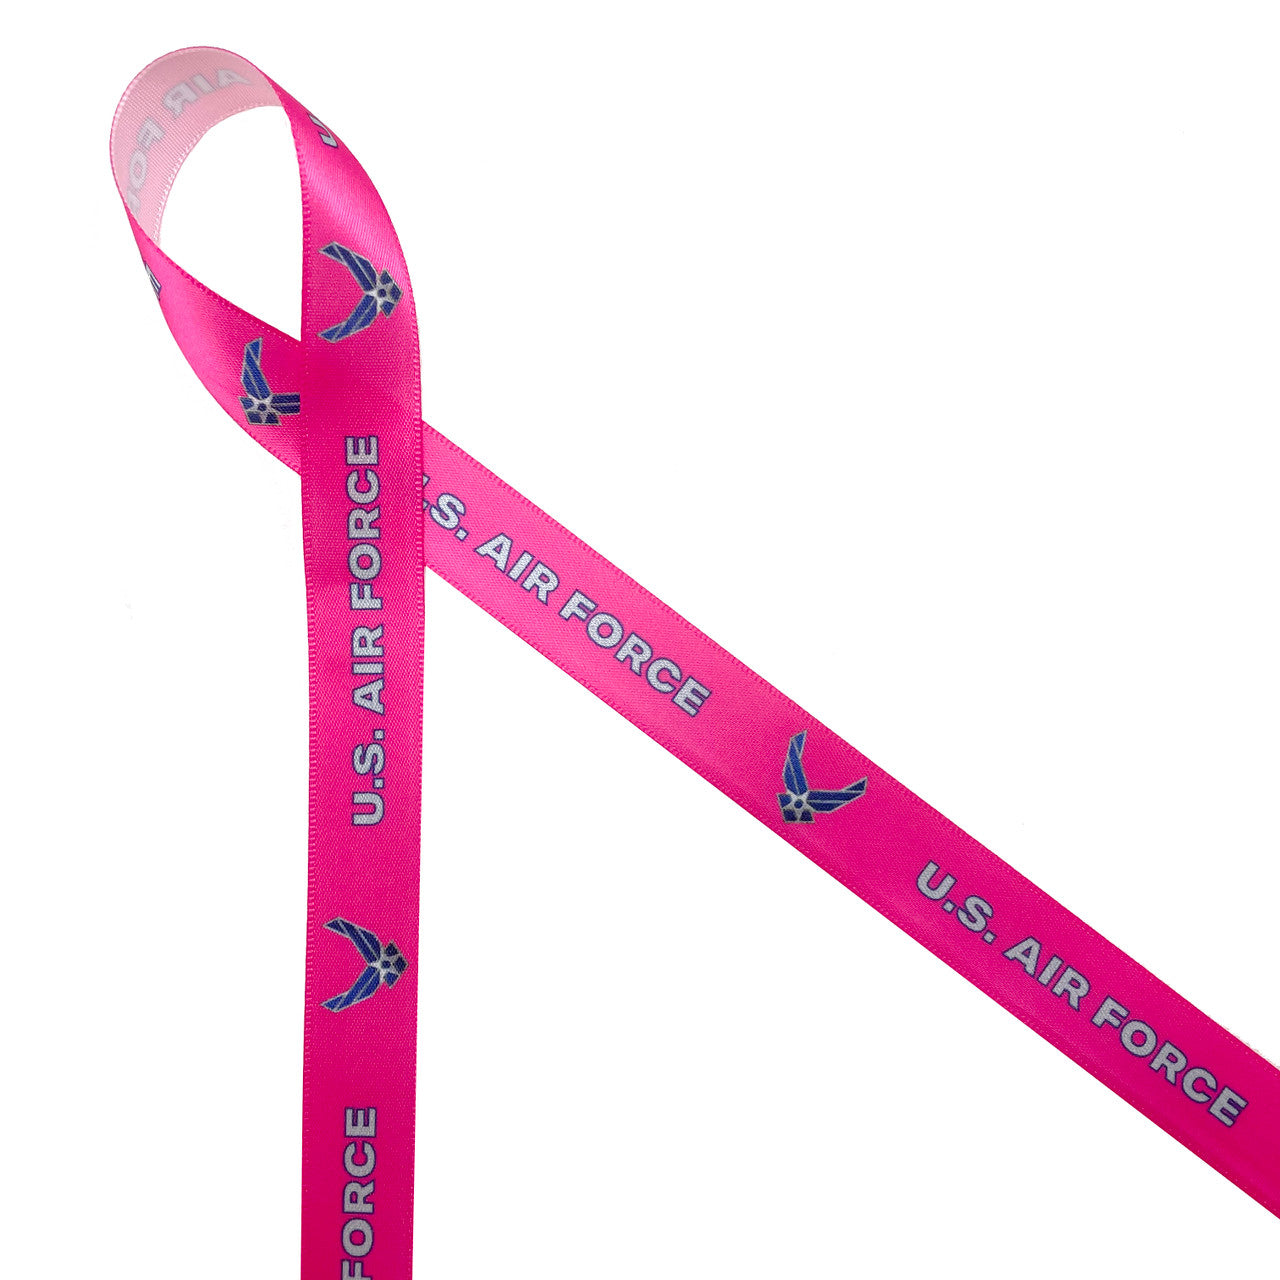 Air Force ribbon in pink with gray text and blue logo printed on 5/8" white single face satin is the ideal ribbon for honoring women in the Air Force. This is the perfect ribbon for graduation from the Air Force Academy, retirement or silver wing celebrations. This is the perfect ribbon for party decor, party favors, gift wrap and floral design. All our ribbons are designed and printed din the USA